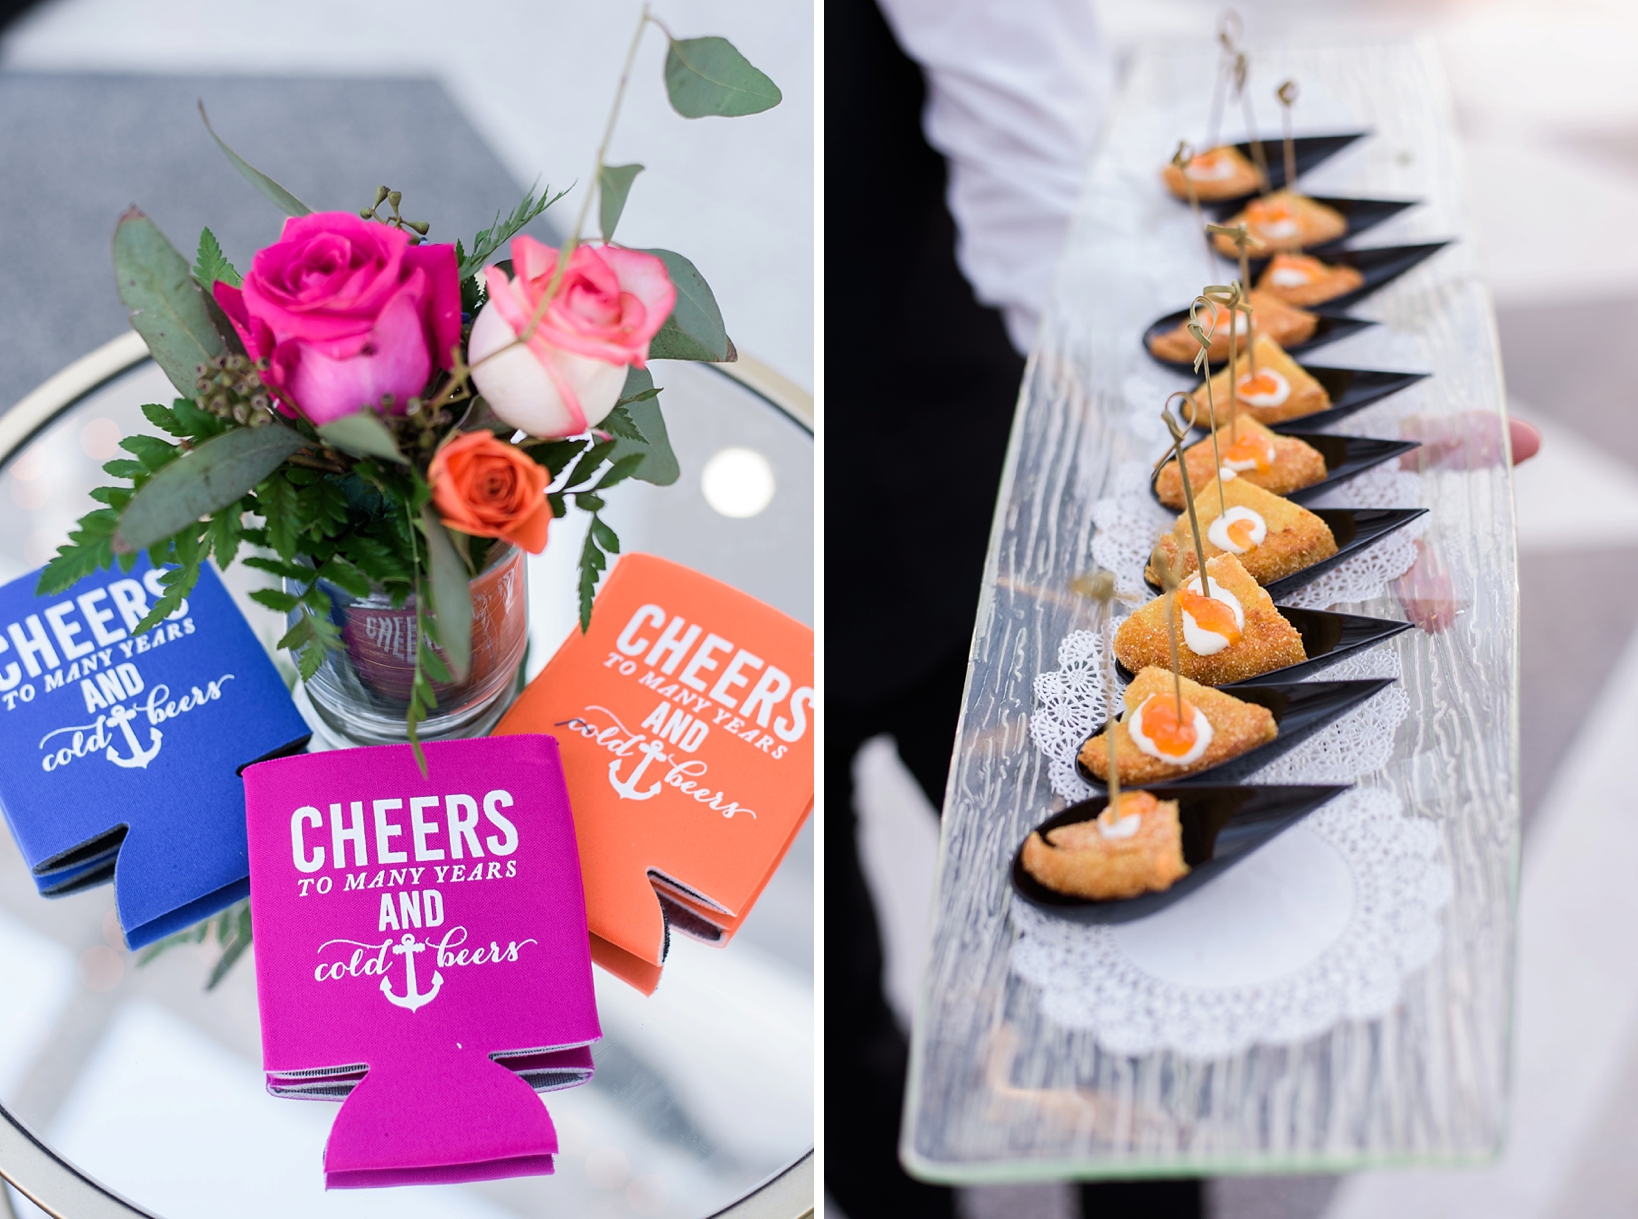 Wedding reception details including beer koozies and passed finger foods